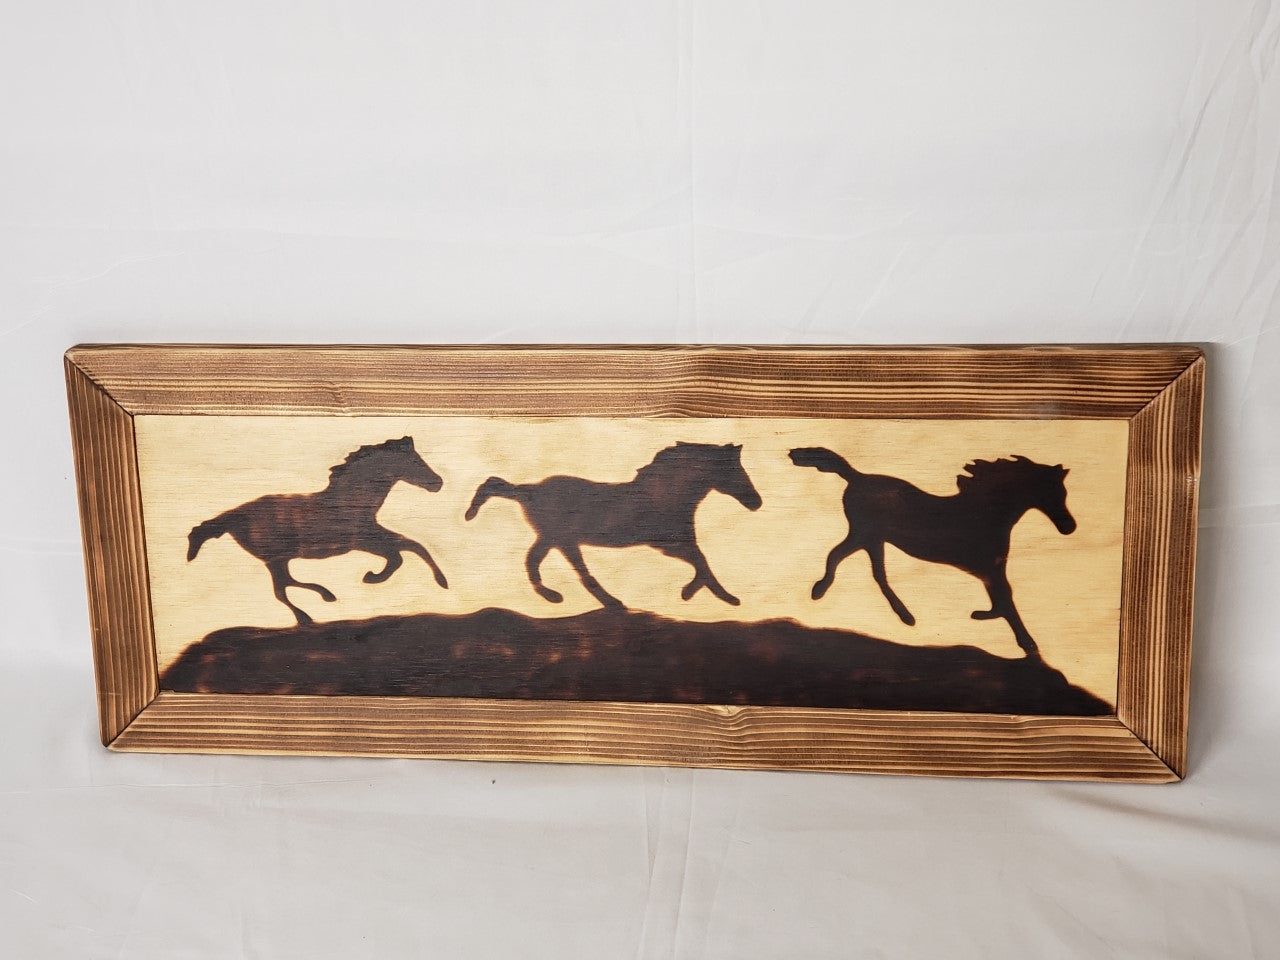 Wood Burned Horses In Wooden Frame. Silhouette of three horses running on a hill. wall hanging